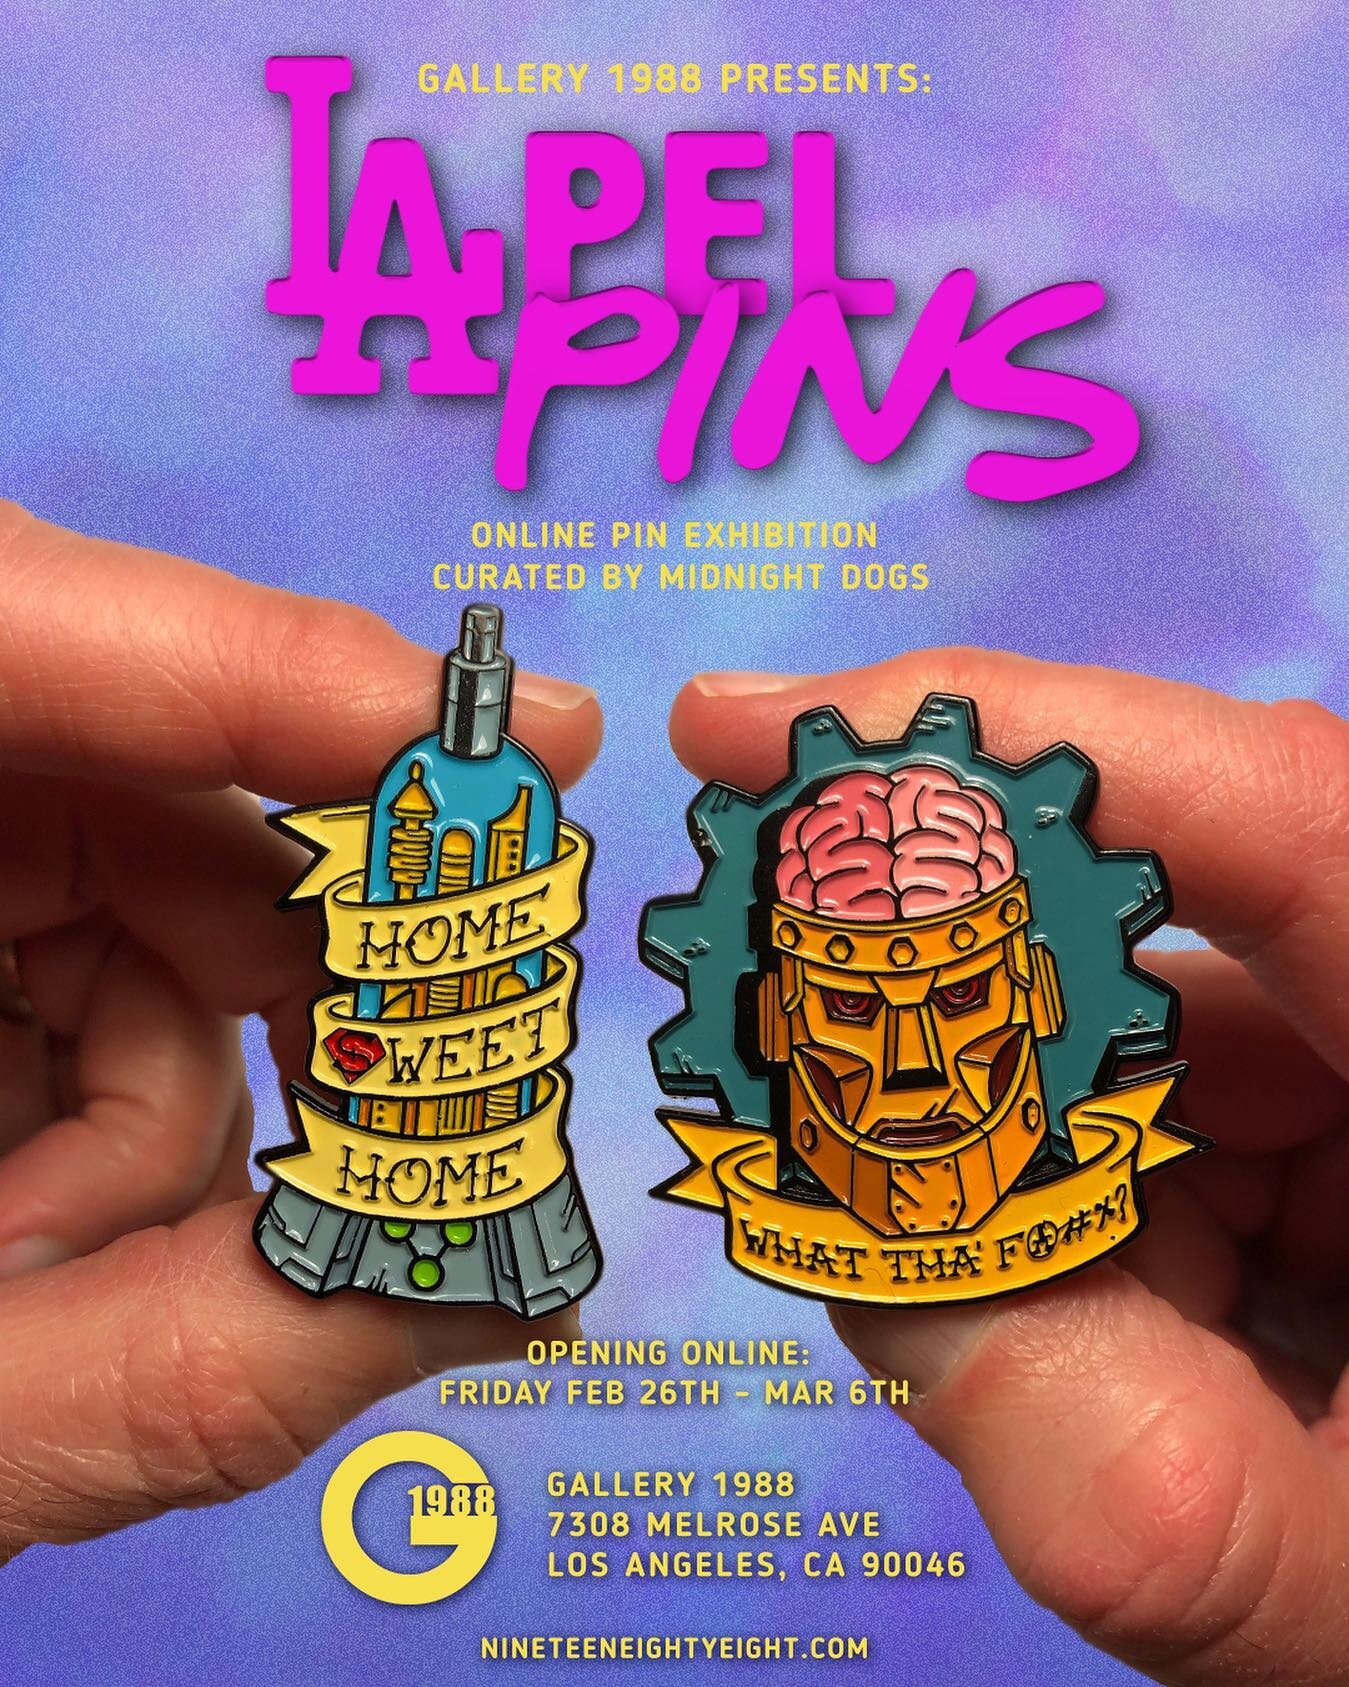 Very thankful to be a part of the next installment of #LApelPINS at @galleries1988 opening tomorrow online at noon Pacific Time. Curated by @midnightdogs this show will run through March 6th. #enamelpins #lapelpins